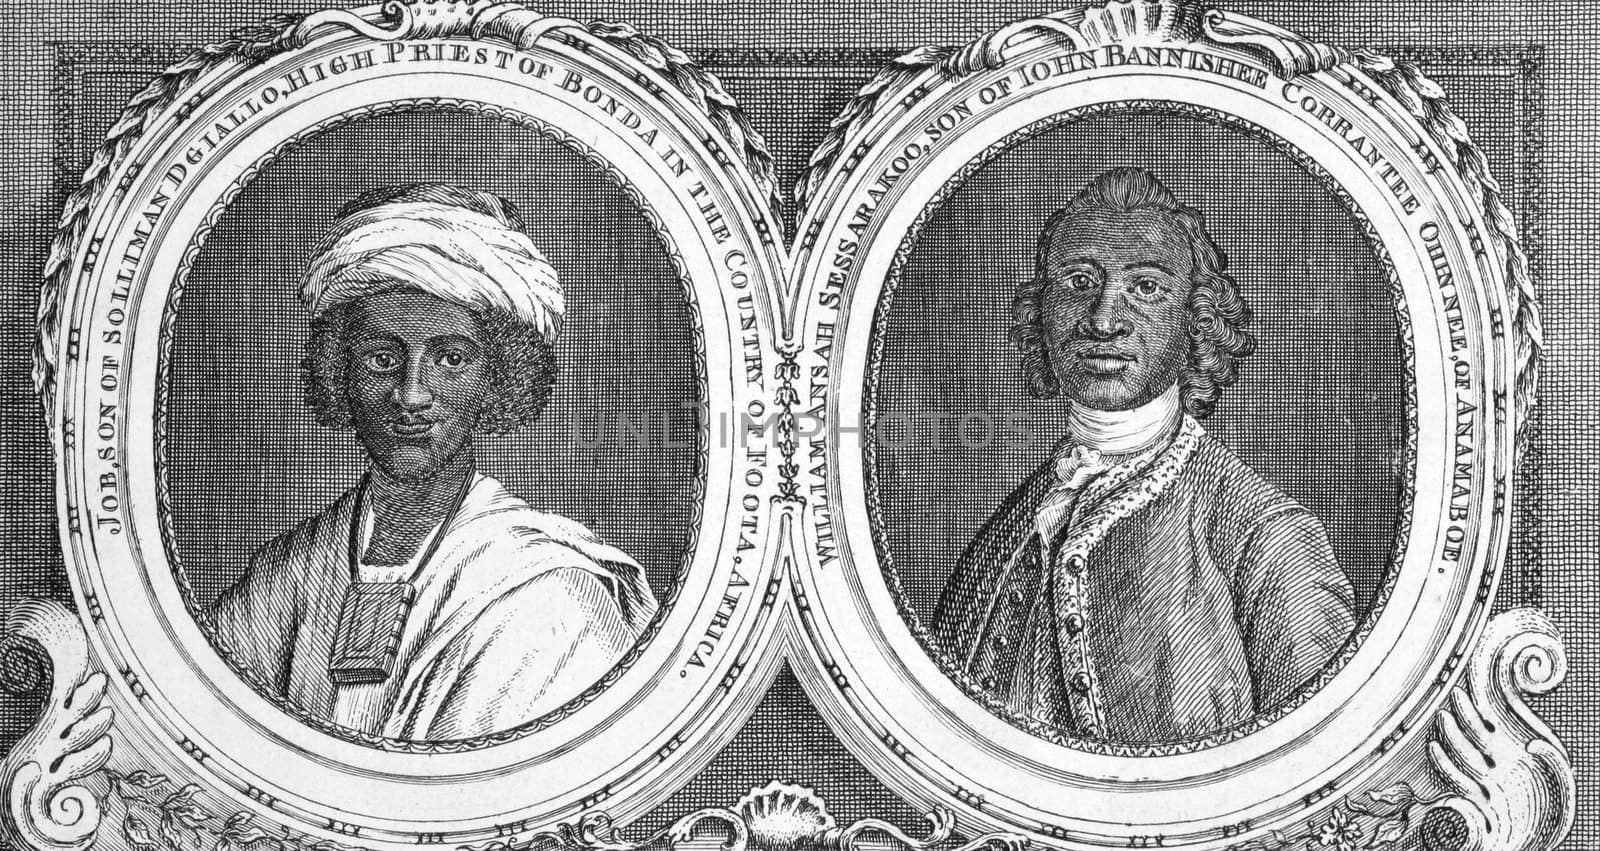 Job, Son of Solliman D Giallo, High Priest of Bonda in the Country of Foota, Africa and William Ansah Sessarakoo, Son of John Bannishee Corrantee, of Anamaboe. Engraving from 1750 published in Gent Magazine.